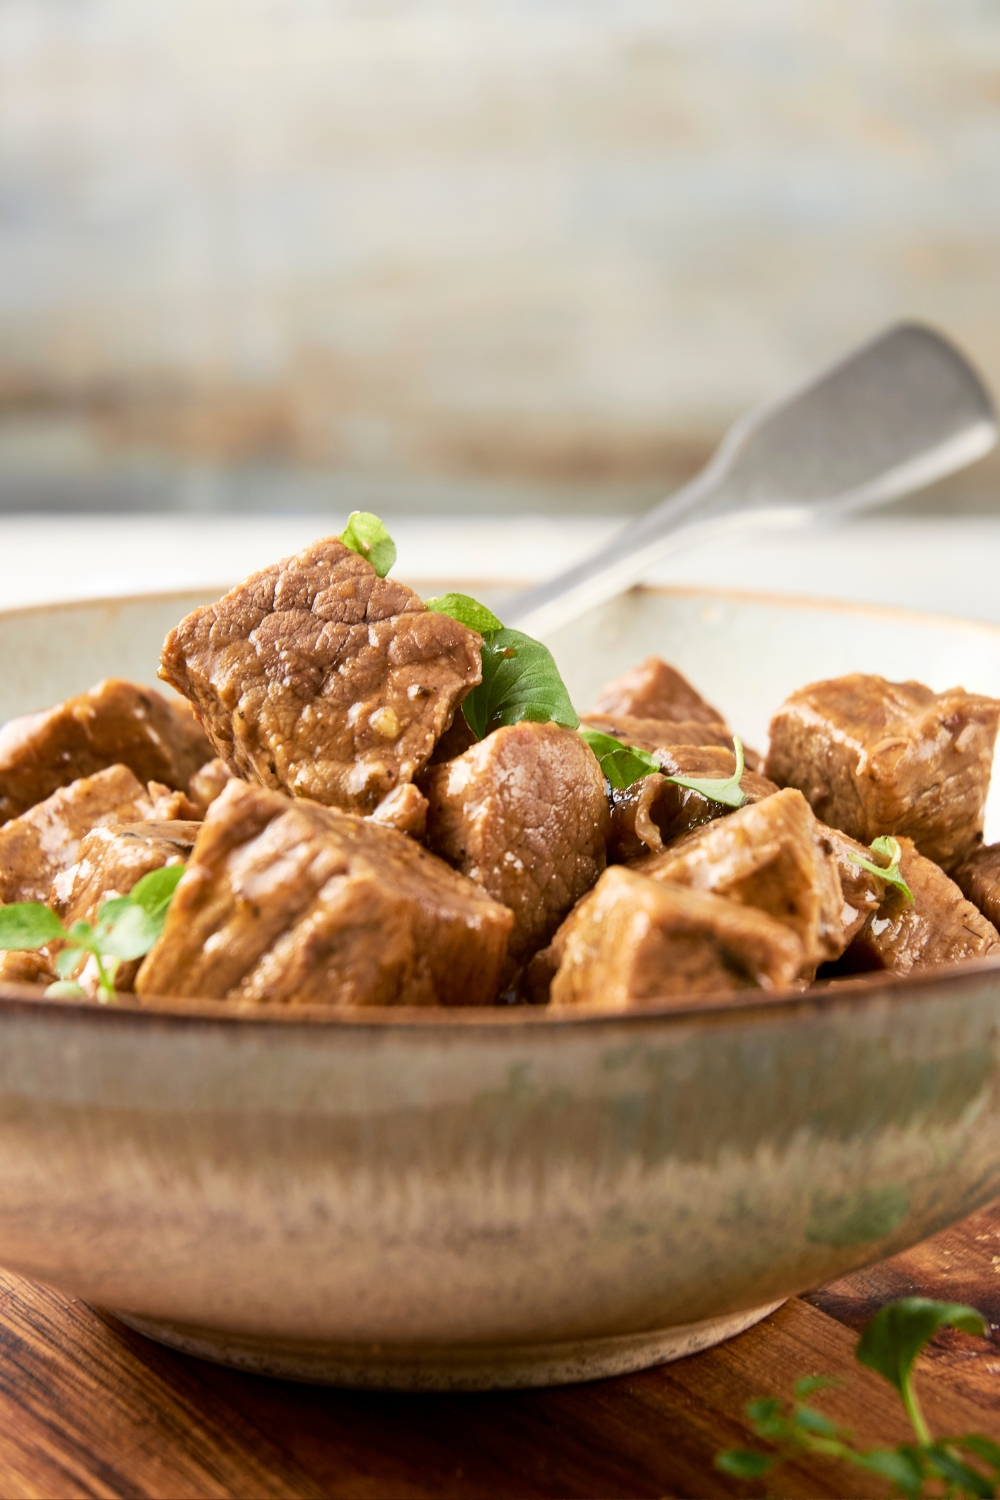 A bowl is full of beef tips, fresh herbs, and gravy. A spoon rests in the background.